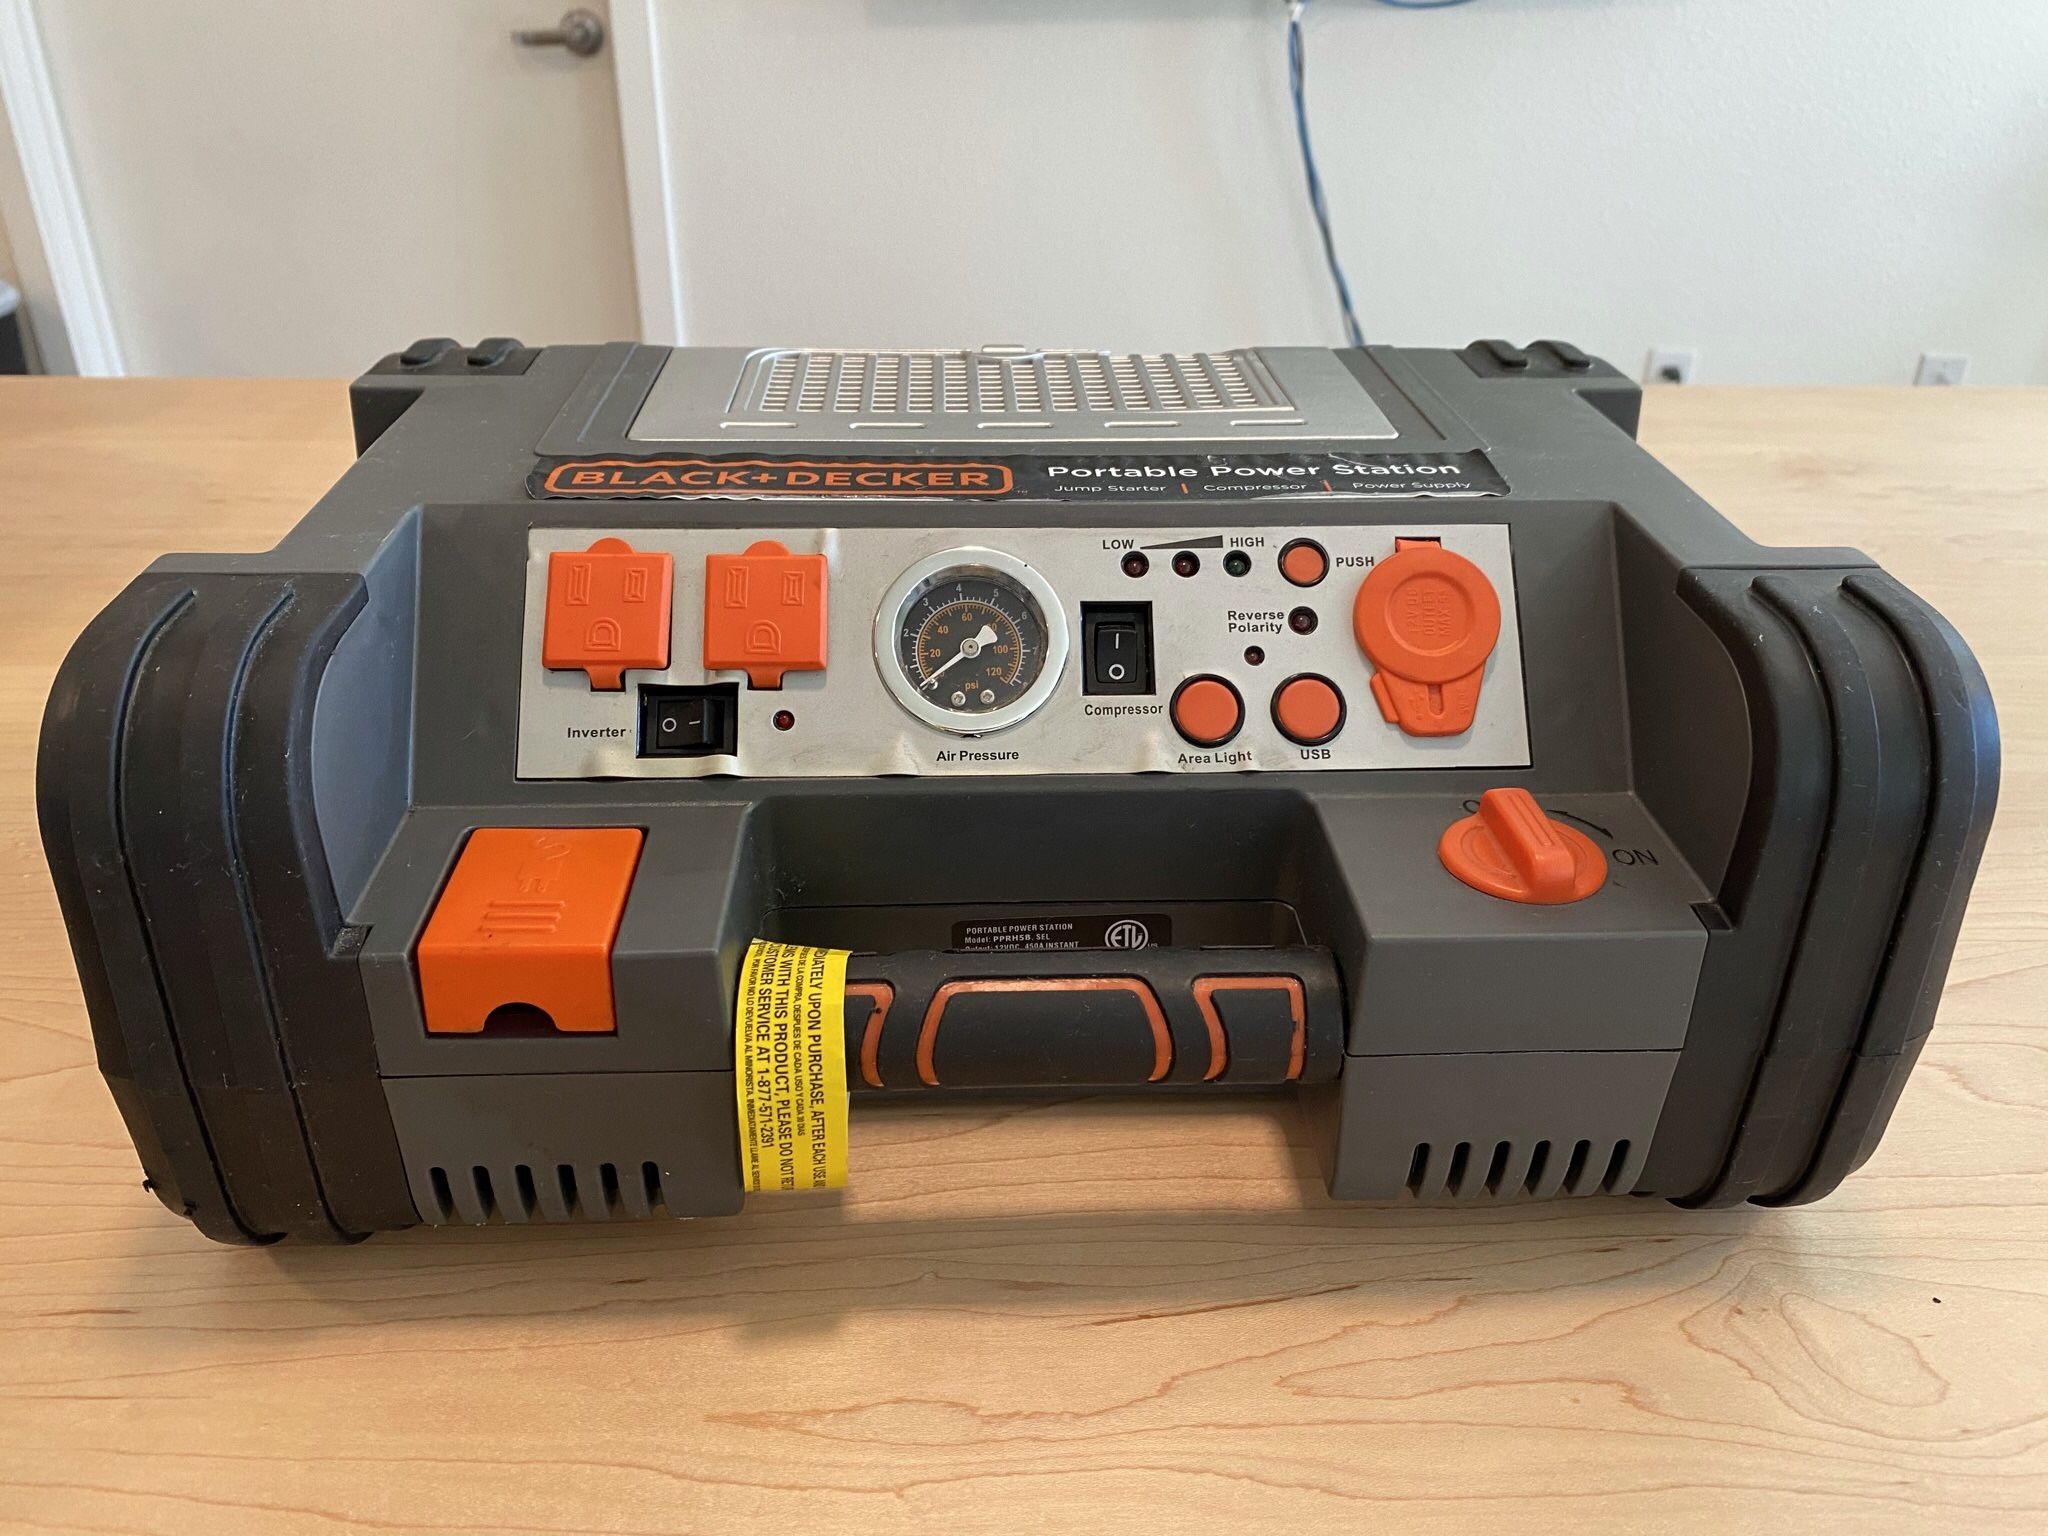 Black Decker Portable Power Station for Sale in Cleveland, OH - OfferUp